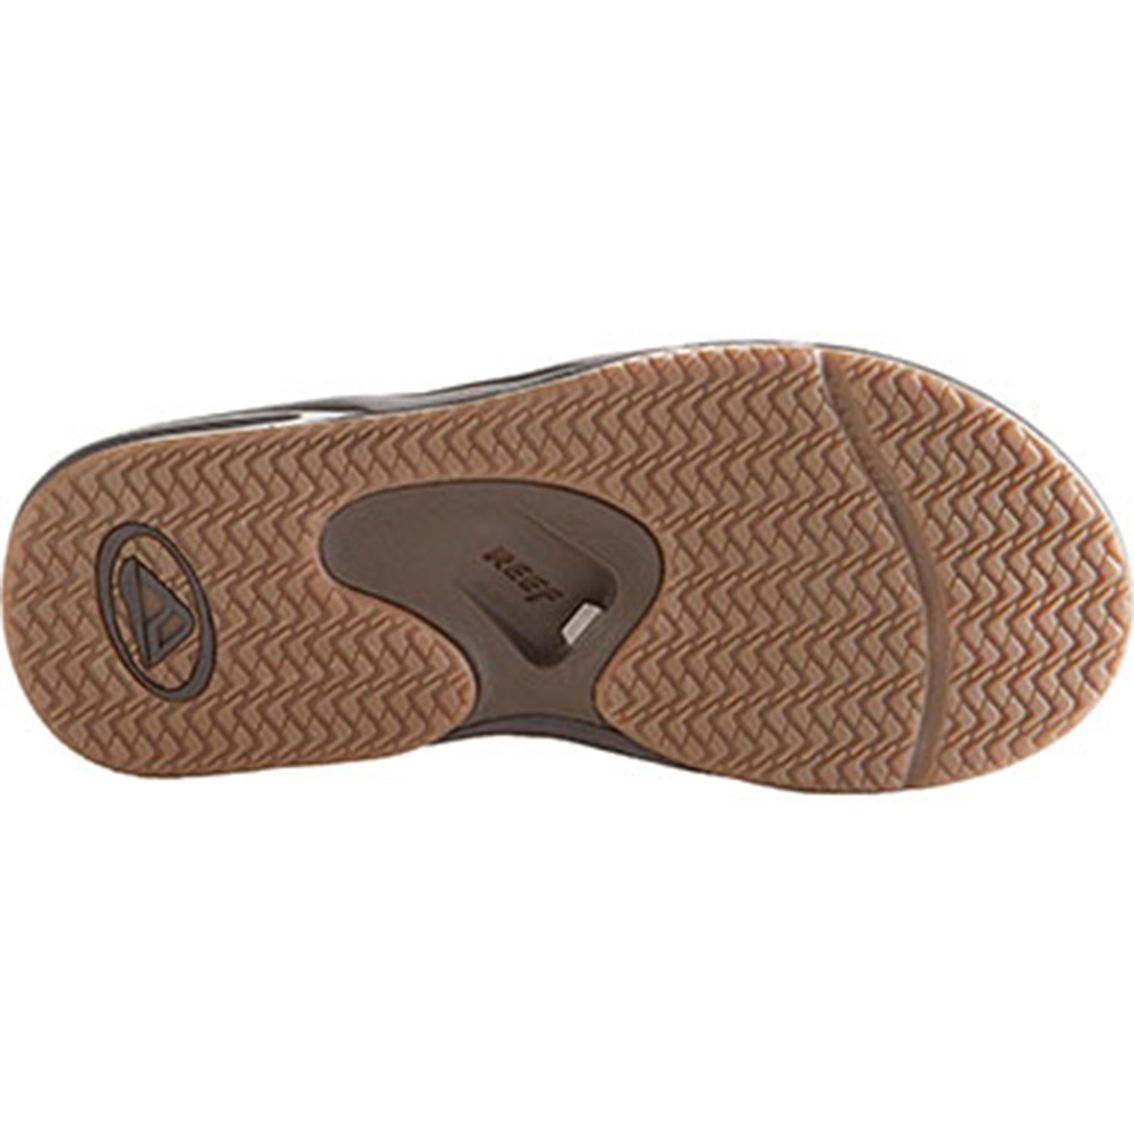 Reef Men's Leather Fanning Sandals - Image 2 of 2